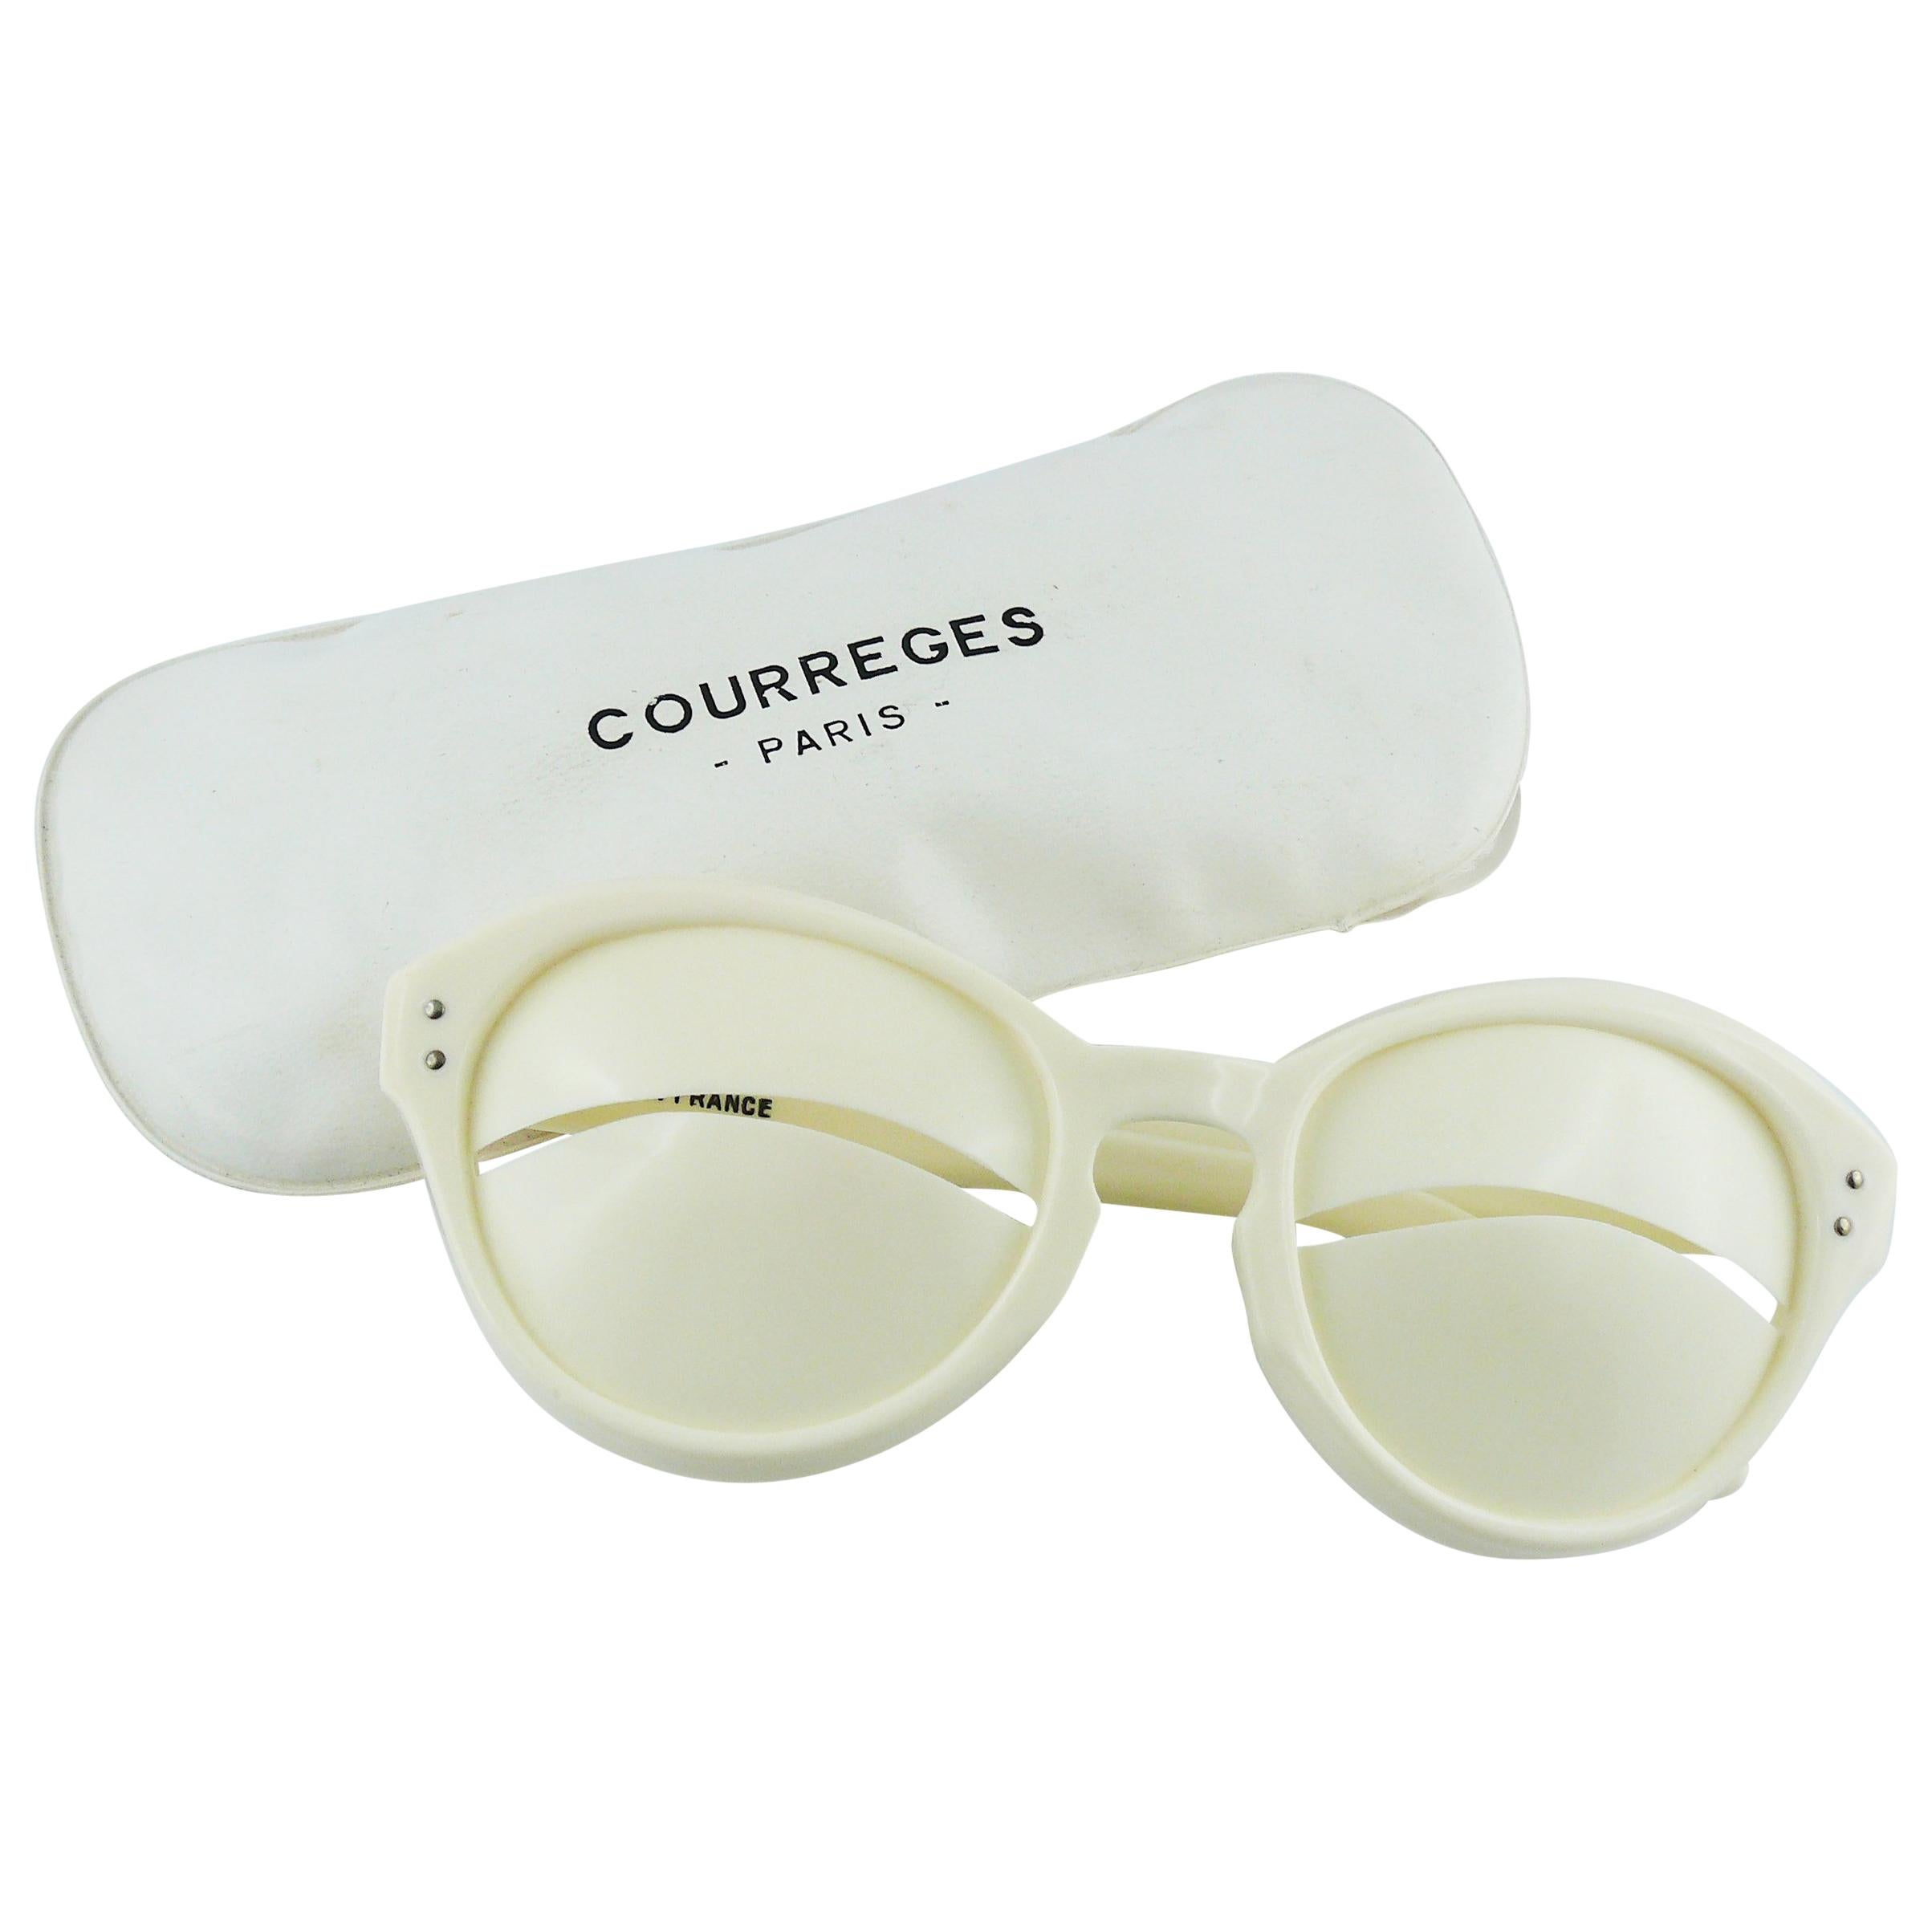 VINTAGE COURREGES ESKIMO SUNGLASSES 1960's NEW OLD STOCK 1 OF 5 AVAILABLE RARE!!